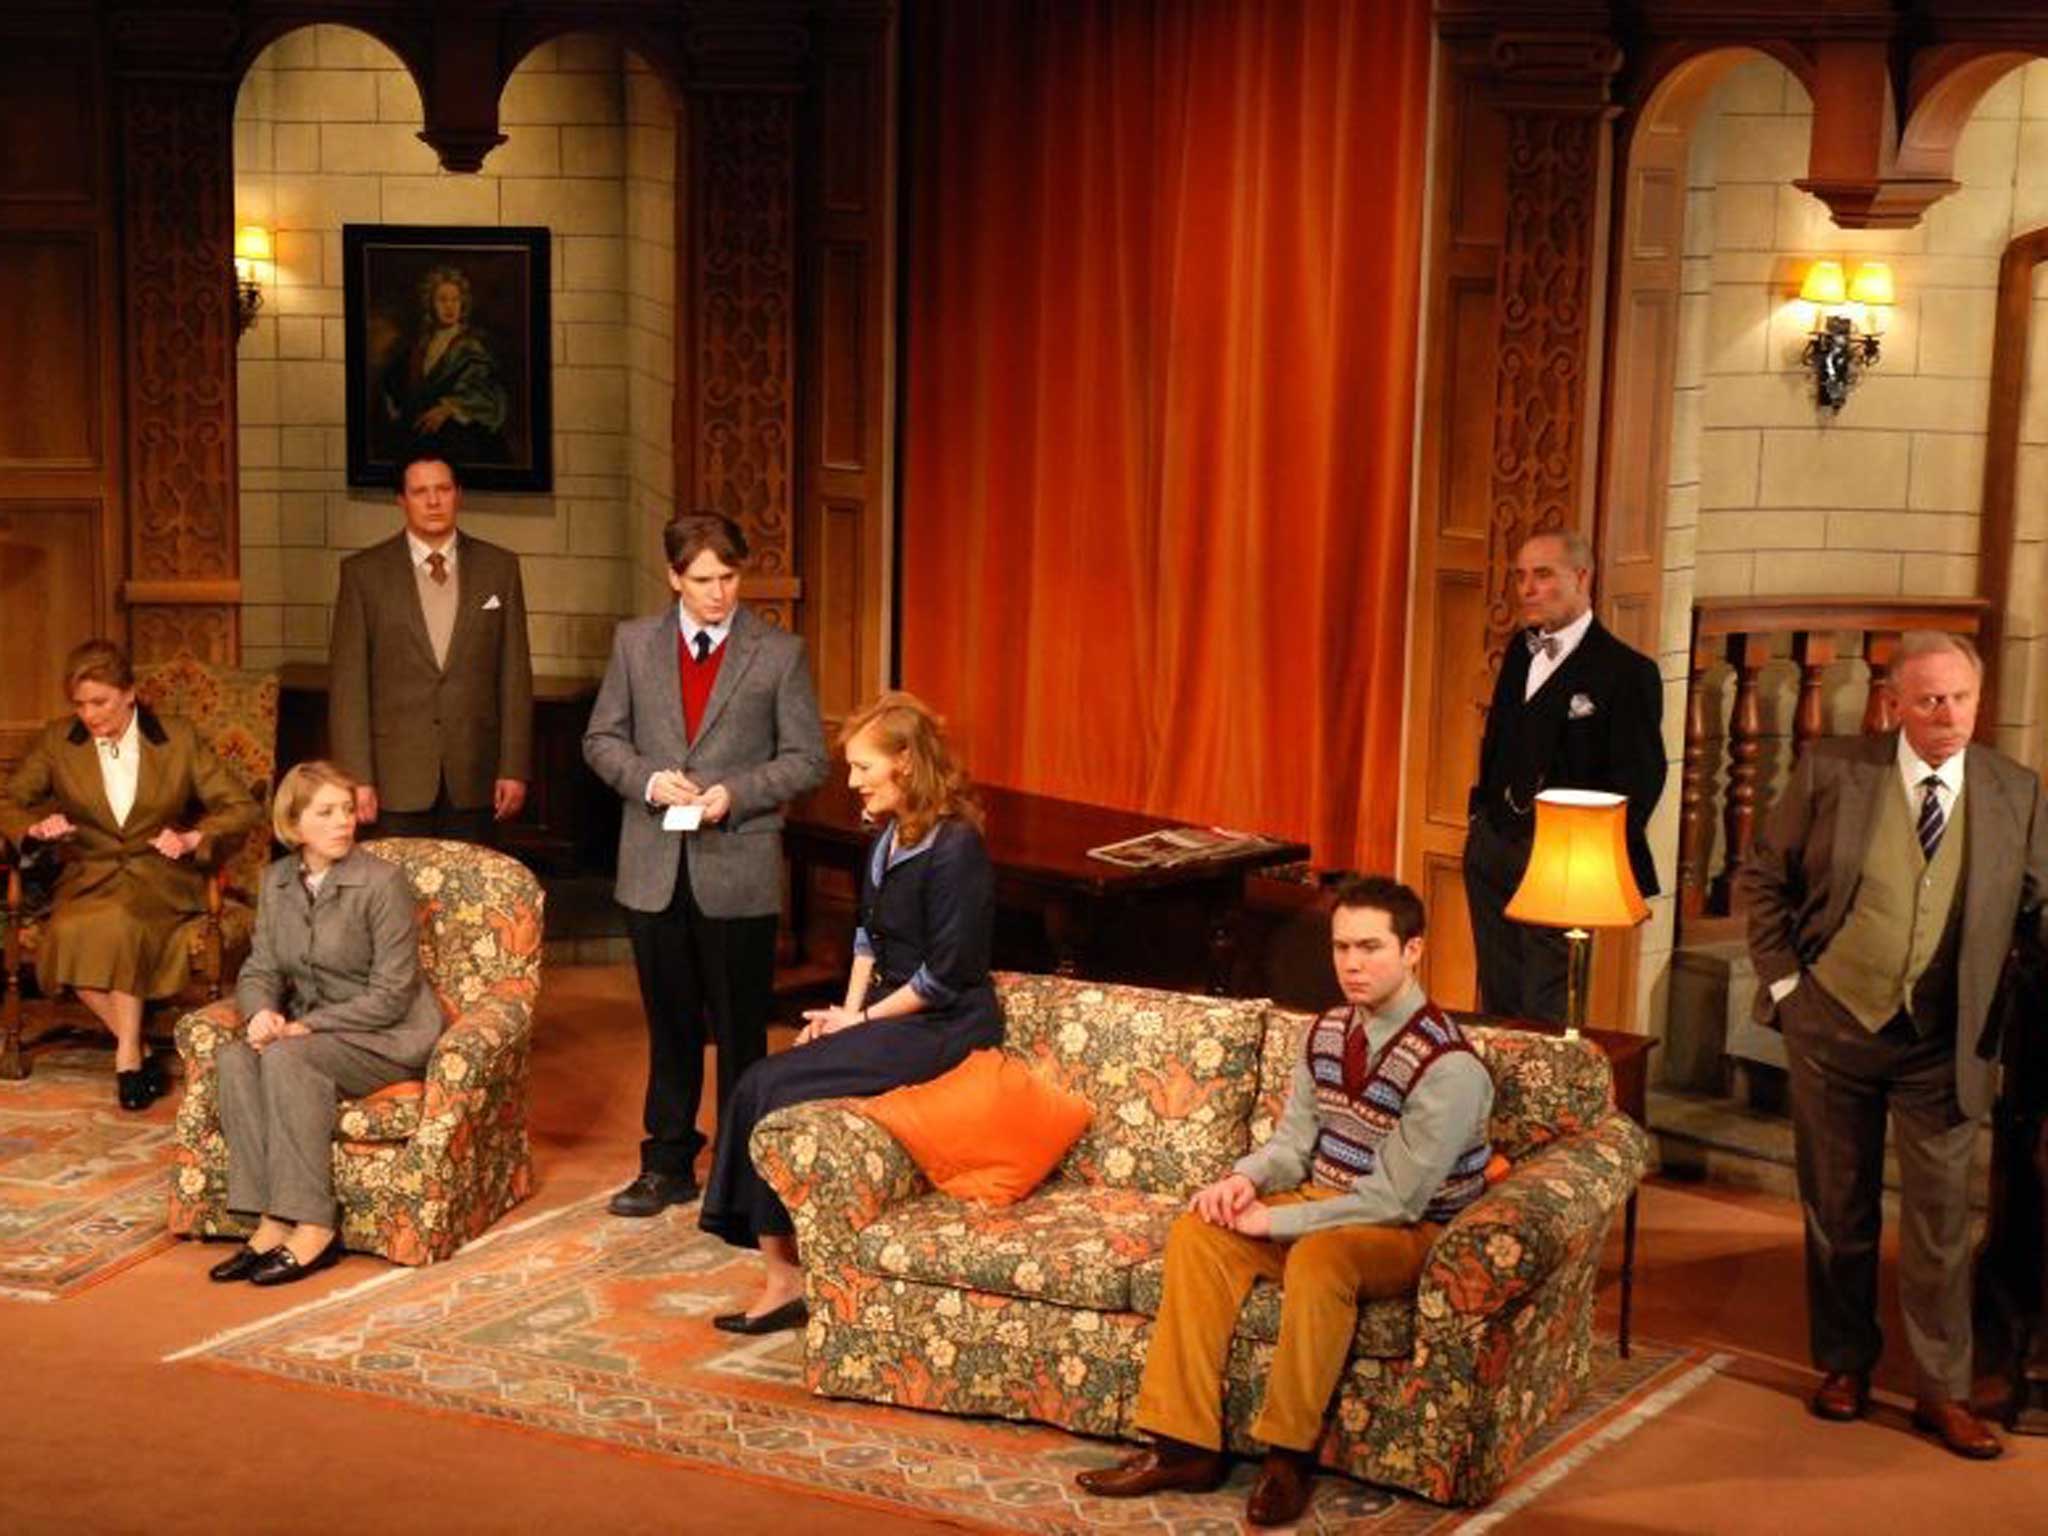 Agatha Christie’s The Mousetrap has run in the West End for 63 years